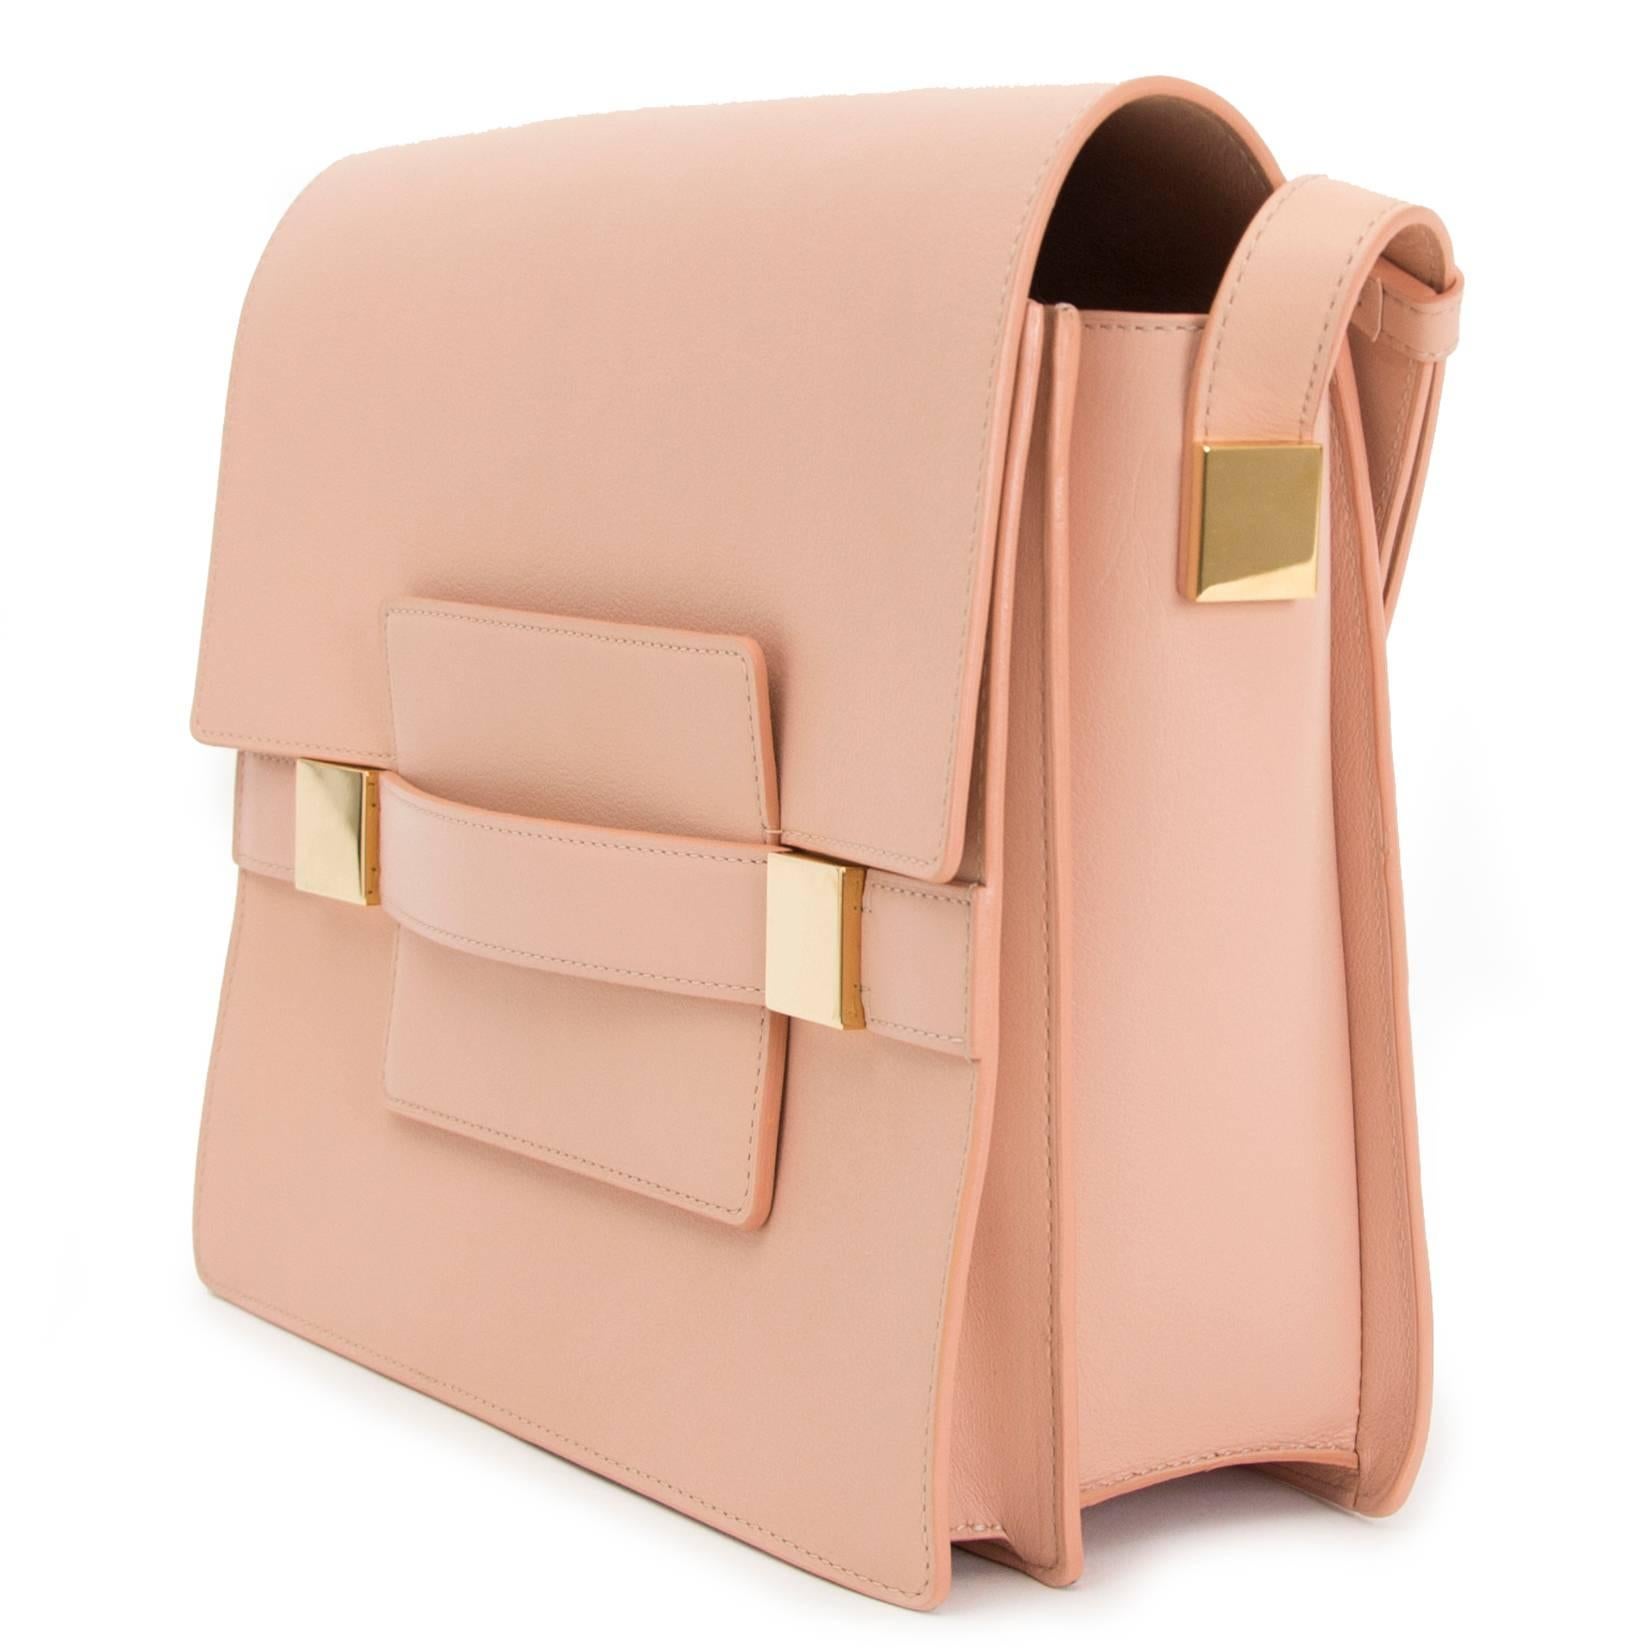 This bag by luxury Belgian leather brand Delvaux comes in dusty pink leather and gold hardware.

This iconic model, Le Madame, is known for its graphic details, clean lines and rectangular shape.

The leather strap of the bag is adjustable and can